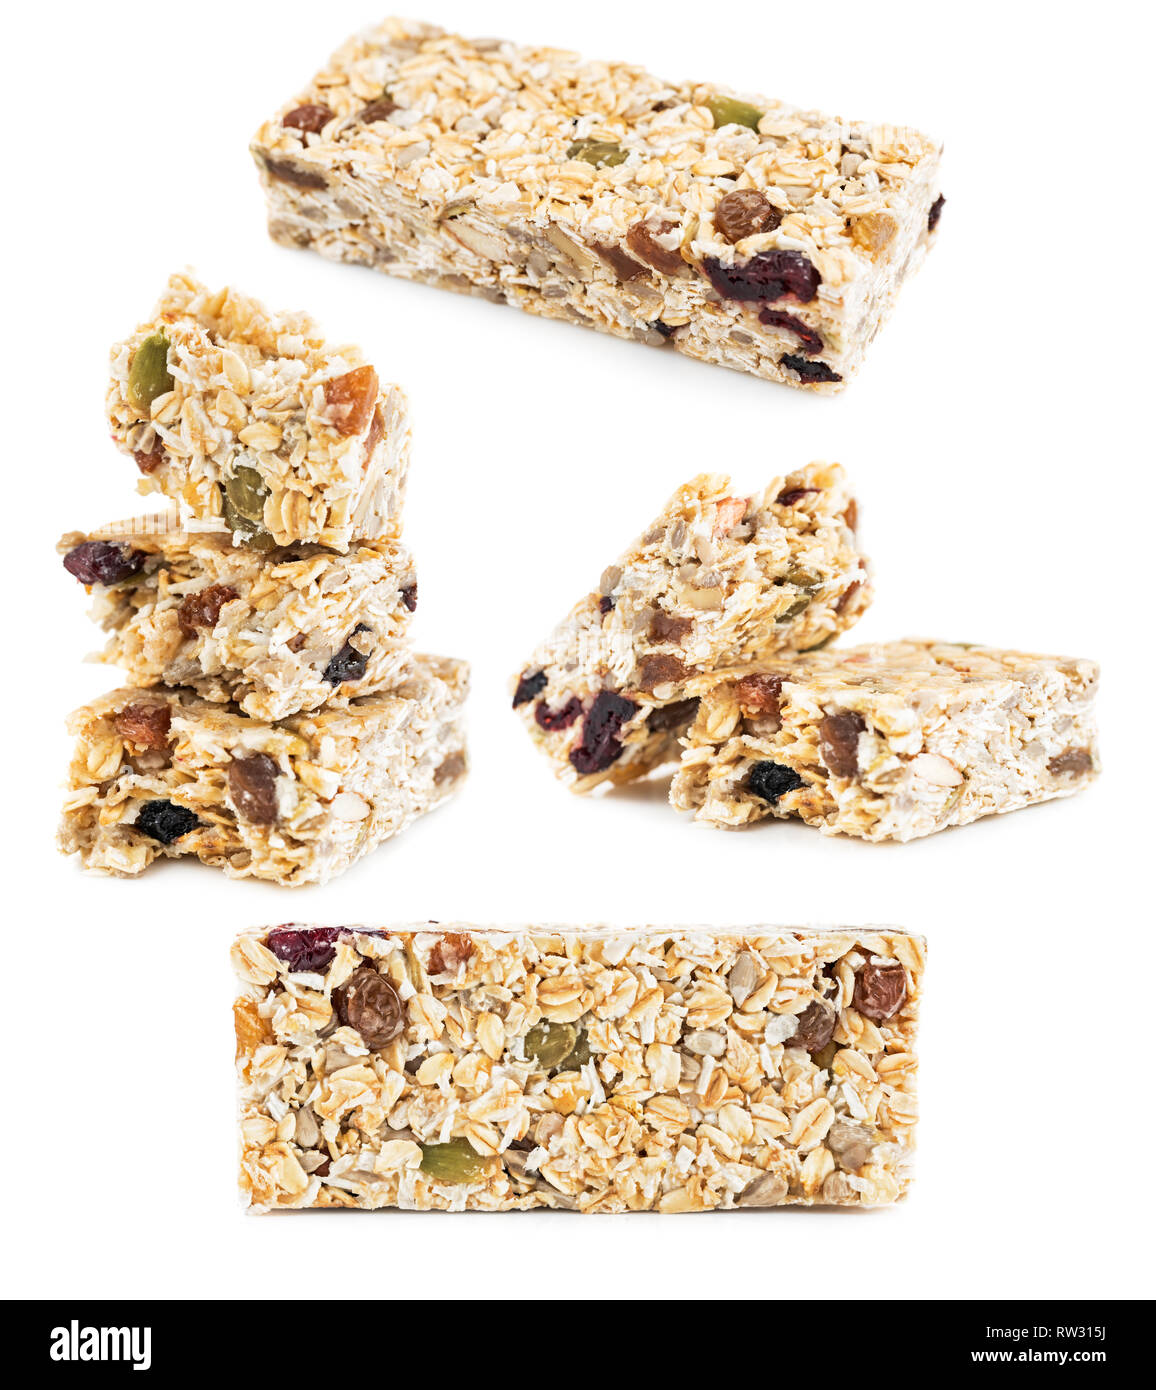 Oat Granola cereal bars isolated on white background Stock Photo